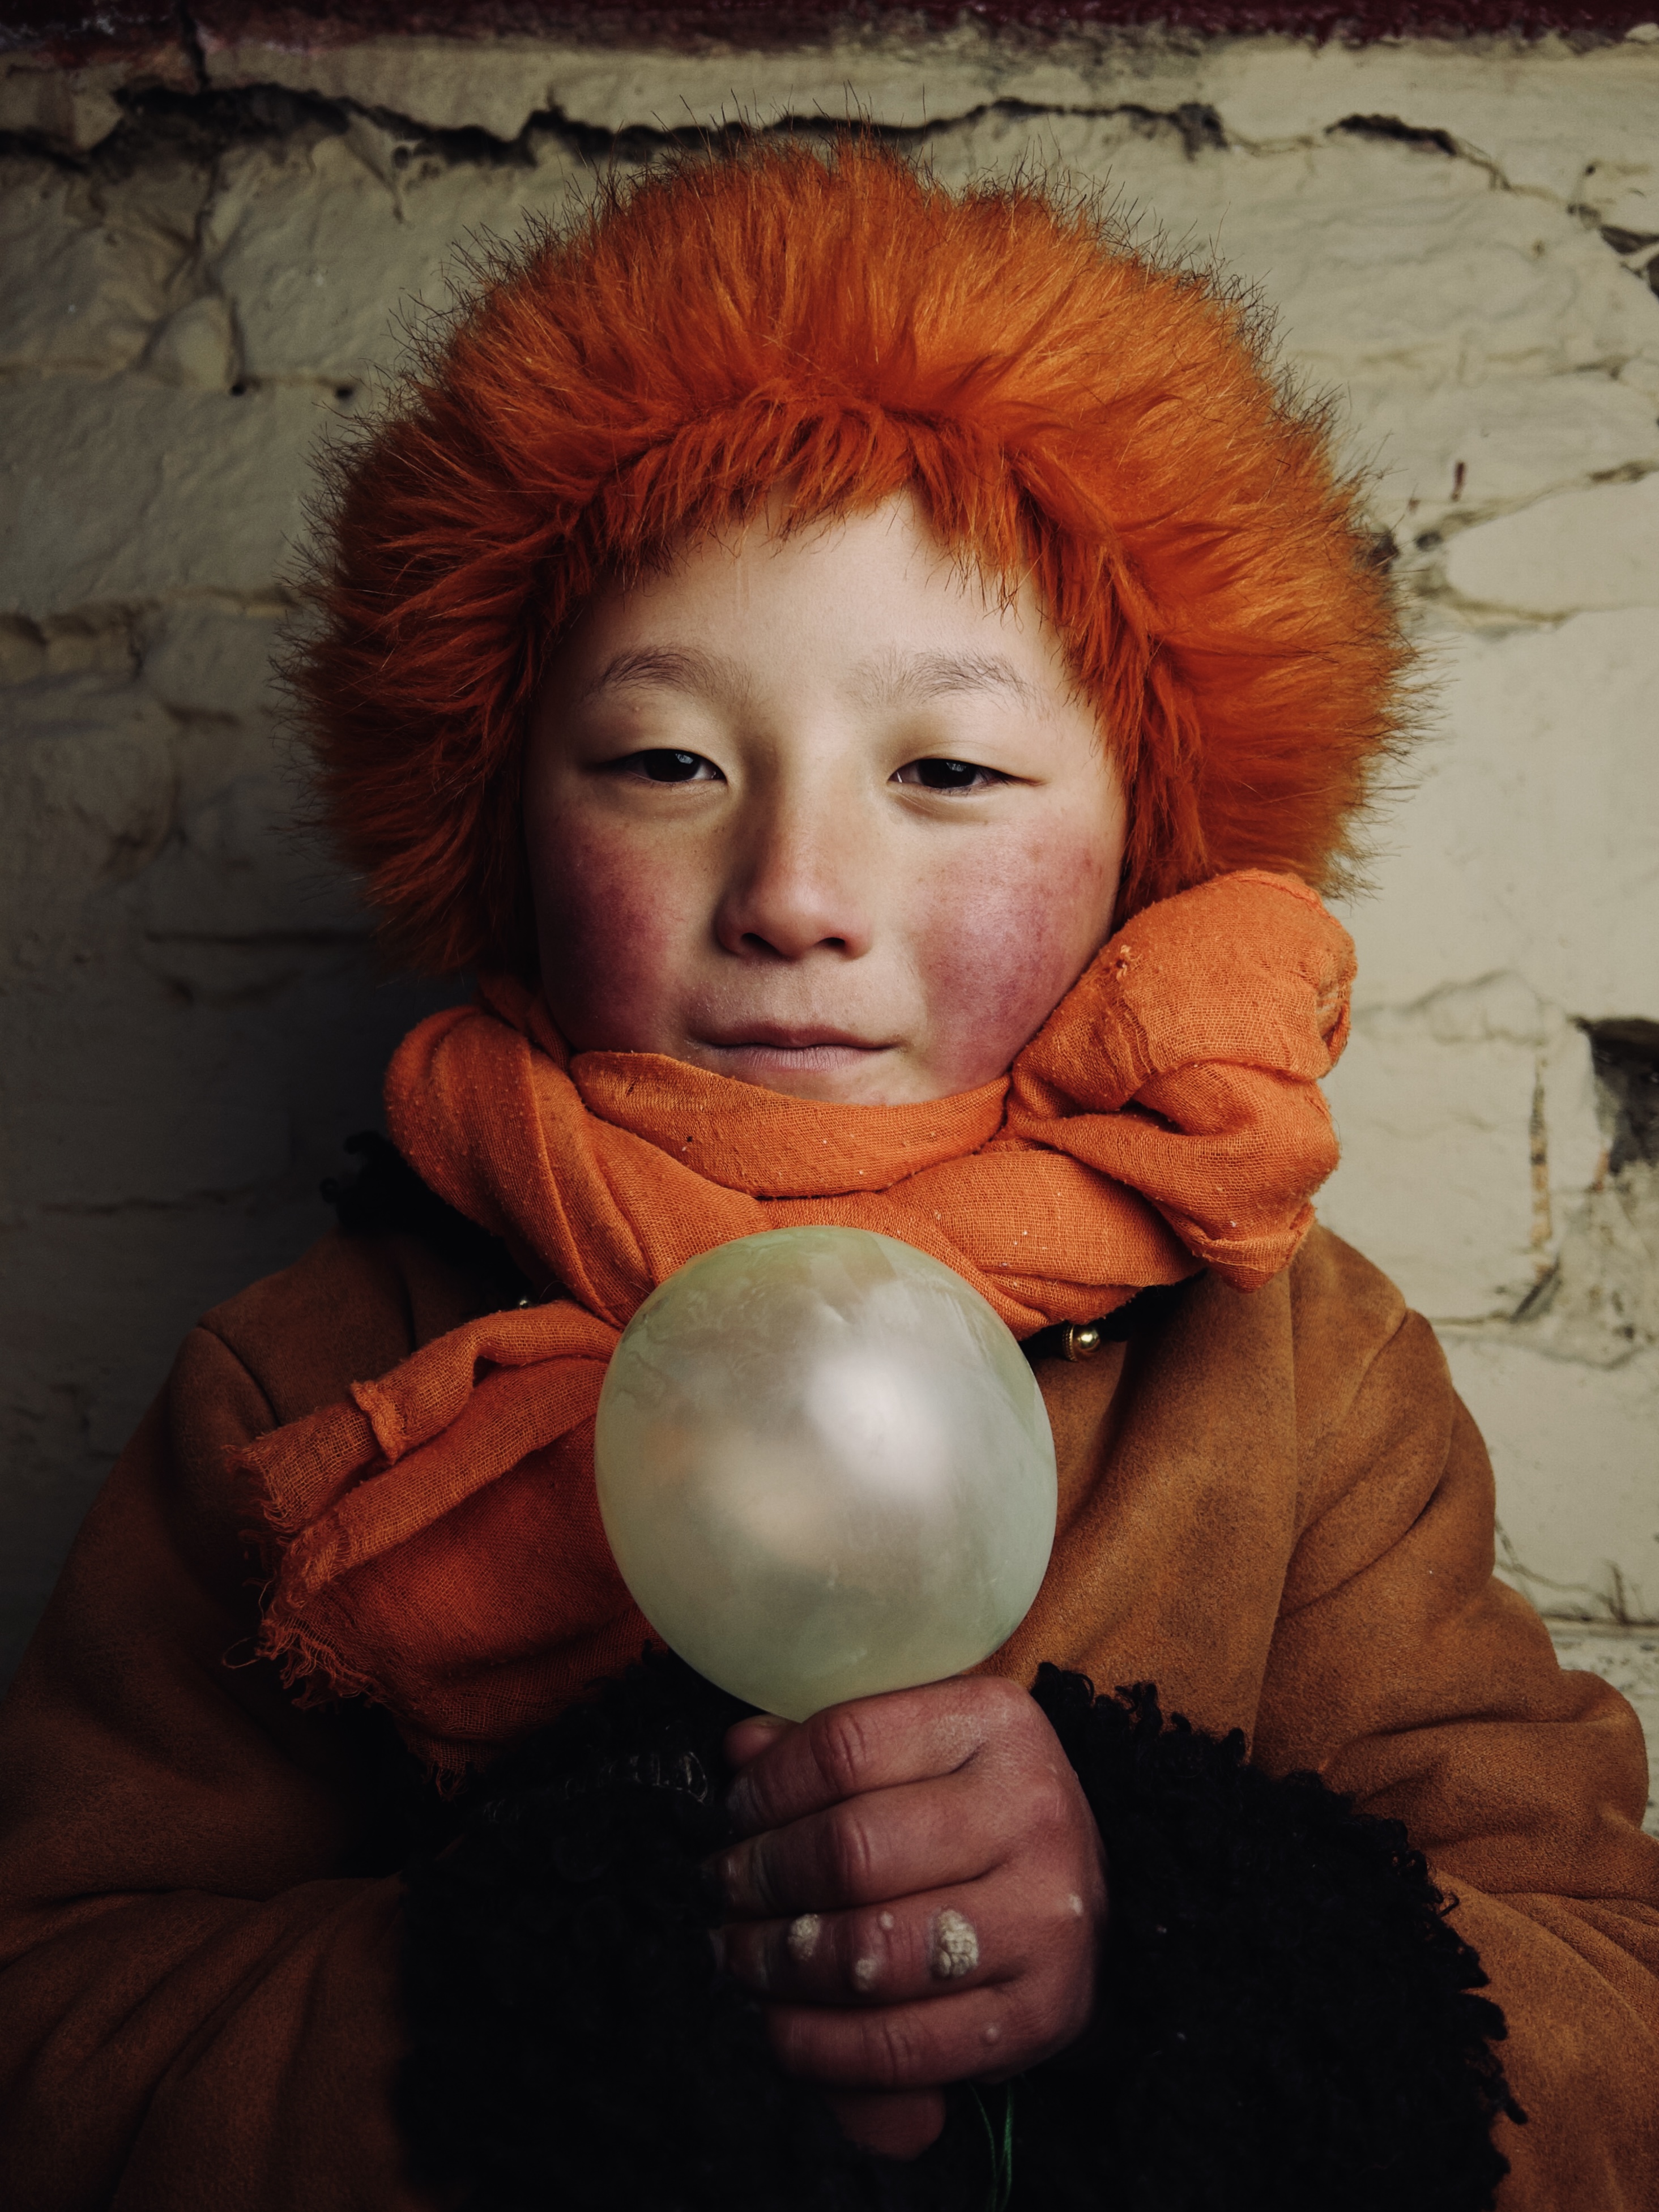 A child with orange hair holding a balloon